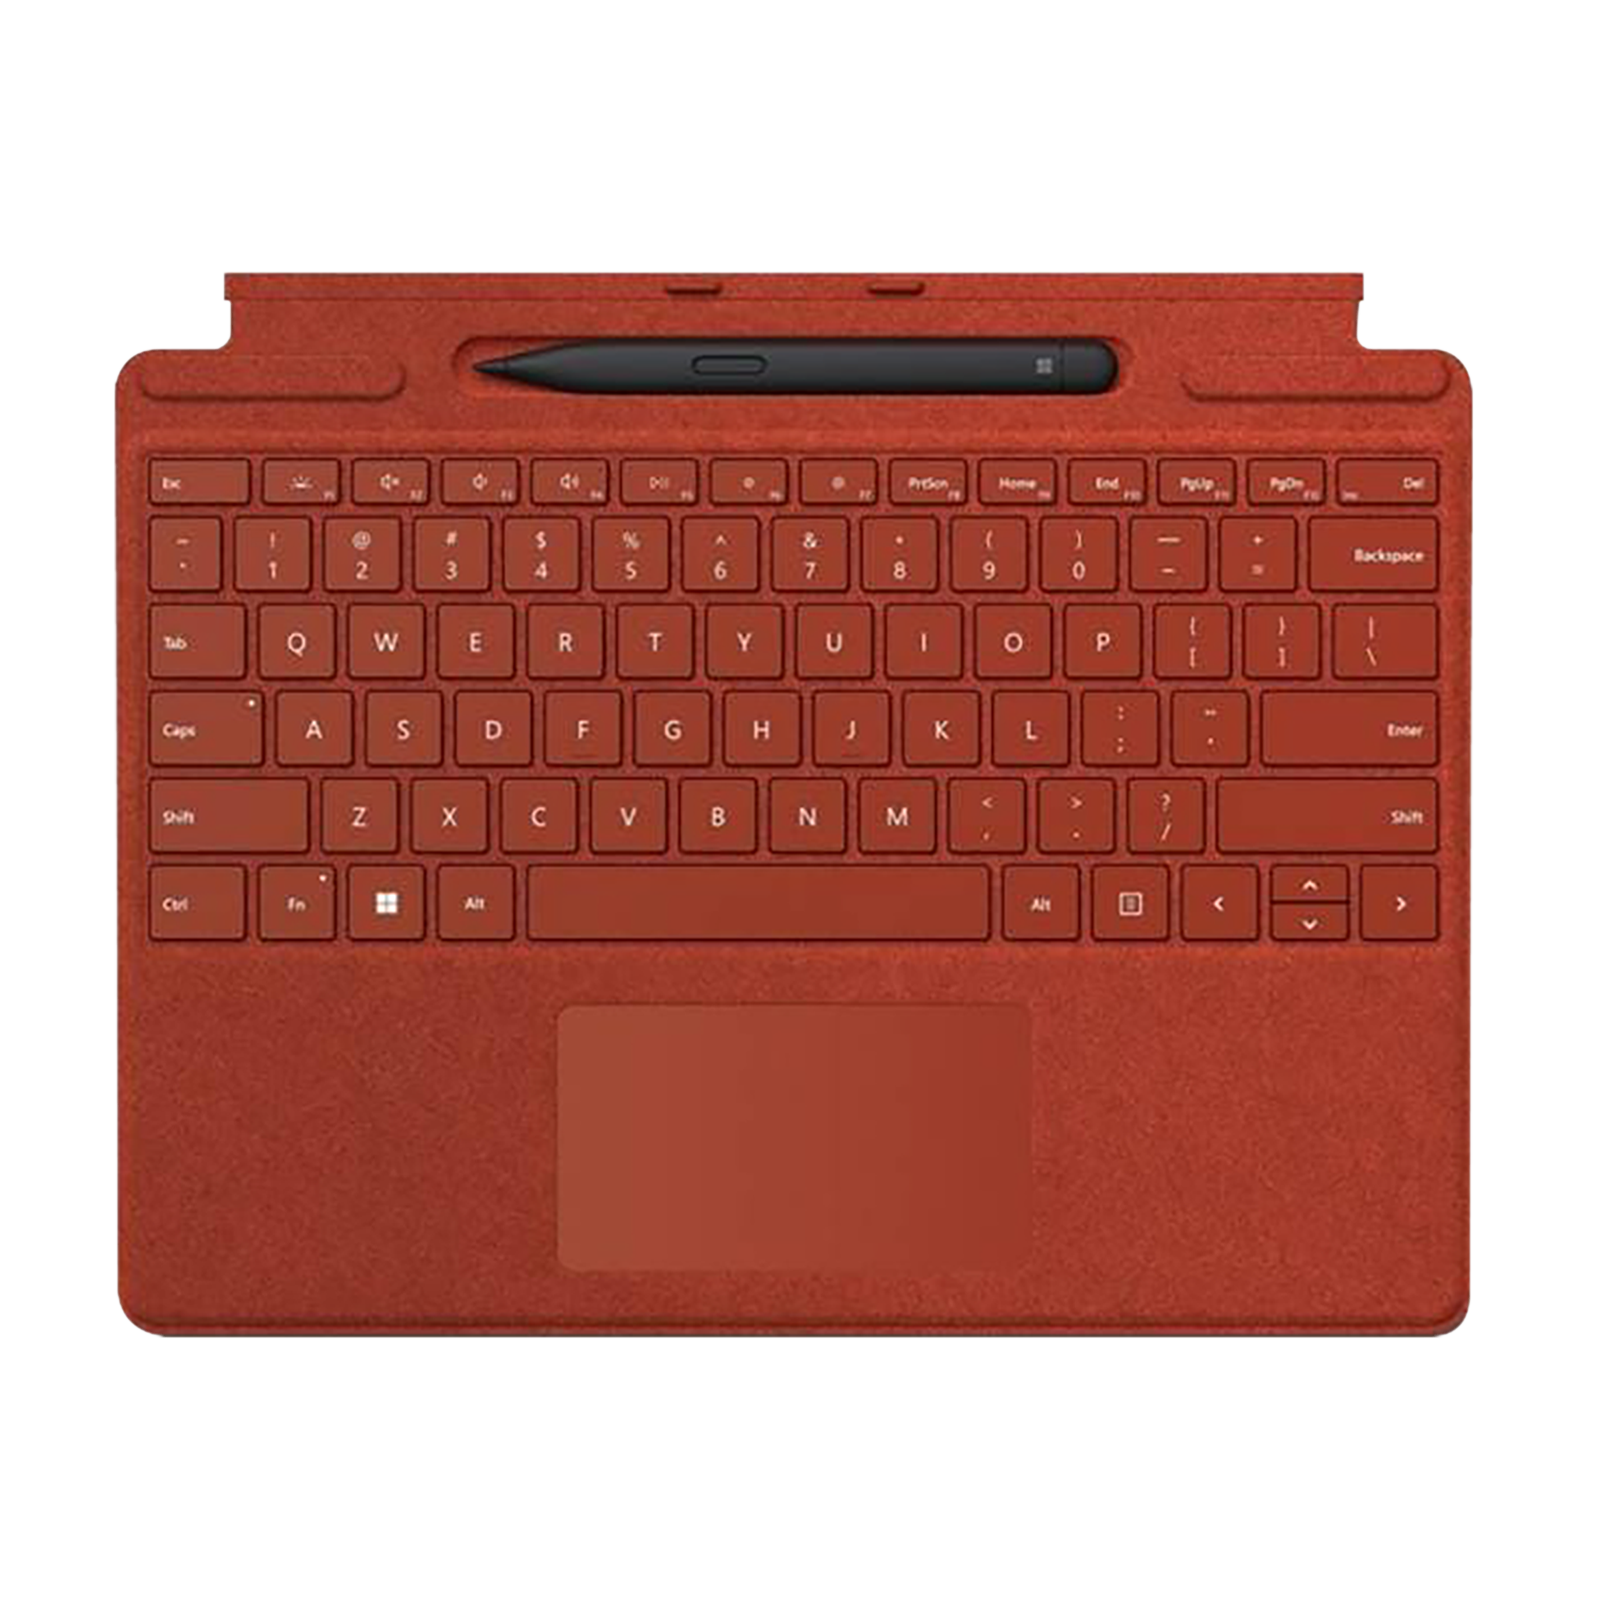 Microsoft Surface Pro Signature Wireless Keyboard with Touchpad (with Slim Pen, Poppy Red)